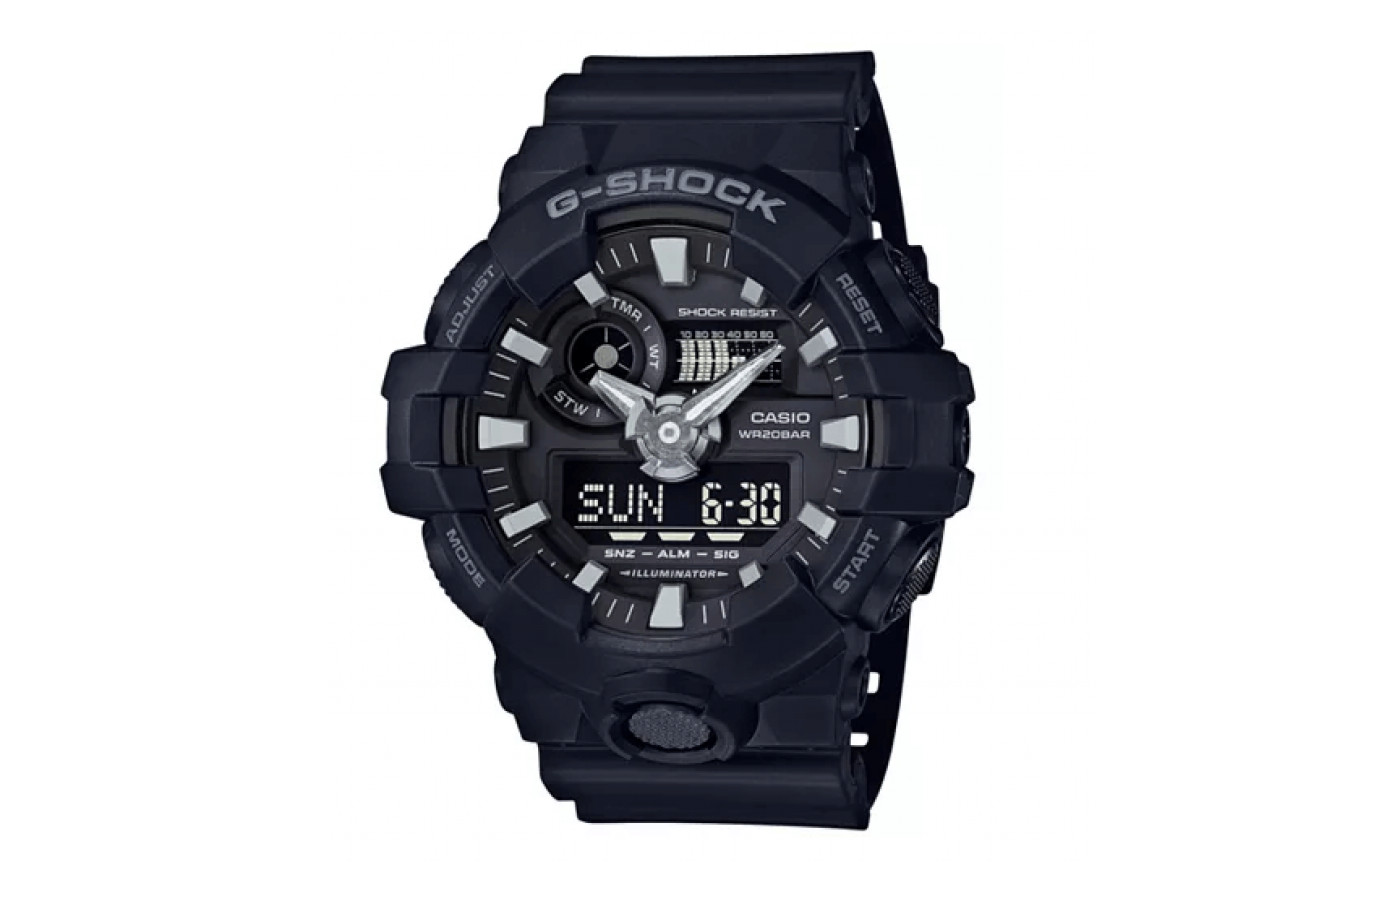 The G-Shock GA700-1B is available in several colorways